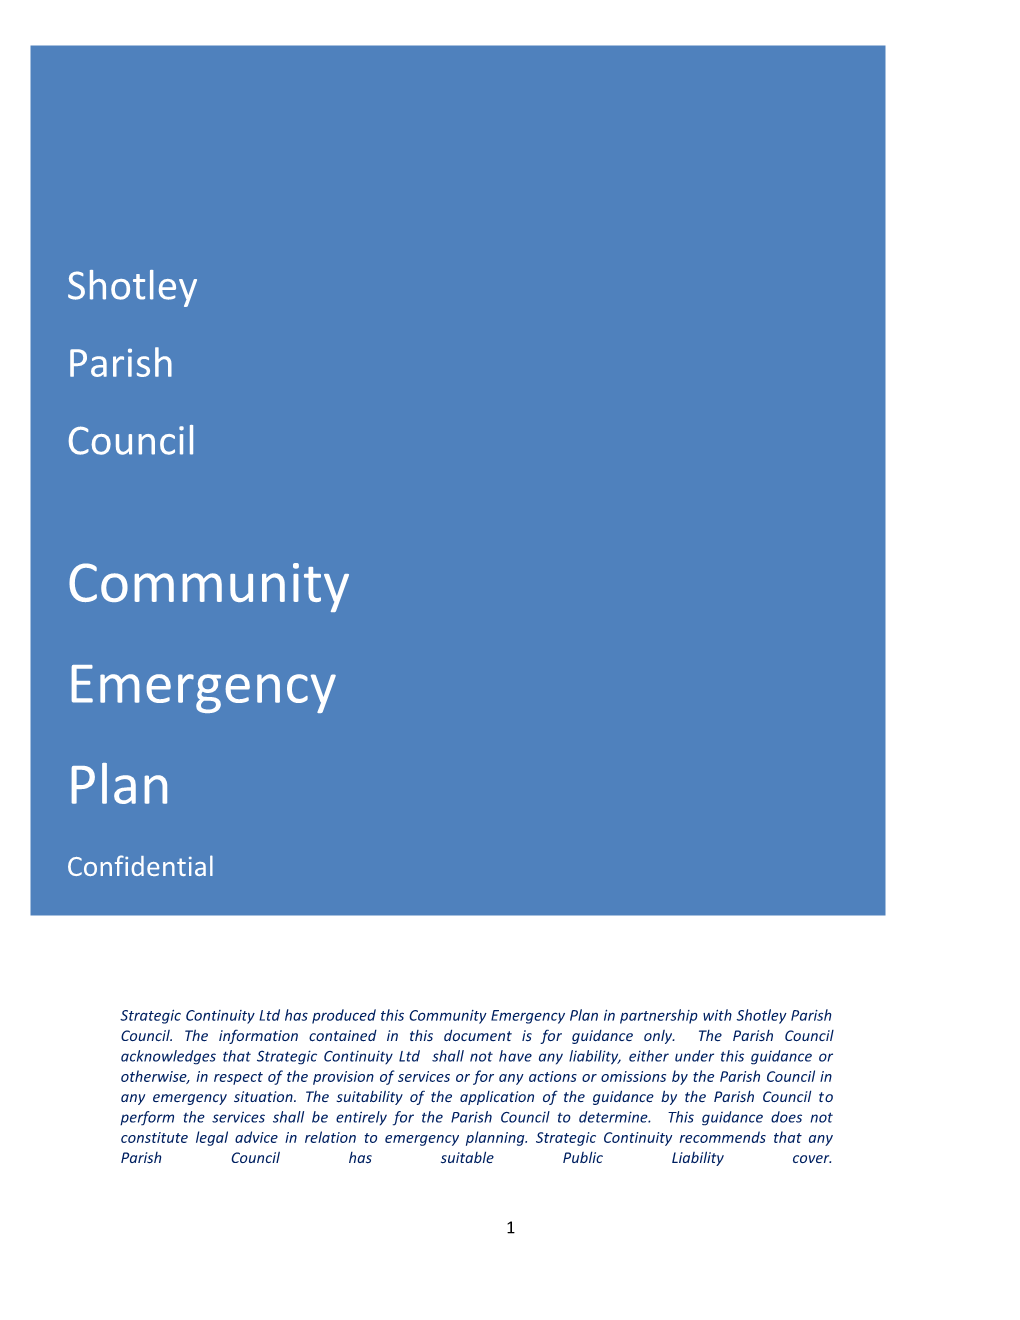 Community Emergency Plan in Partnership with Shotley Parish This Plancouncil